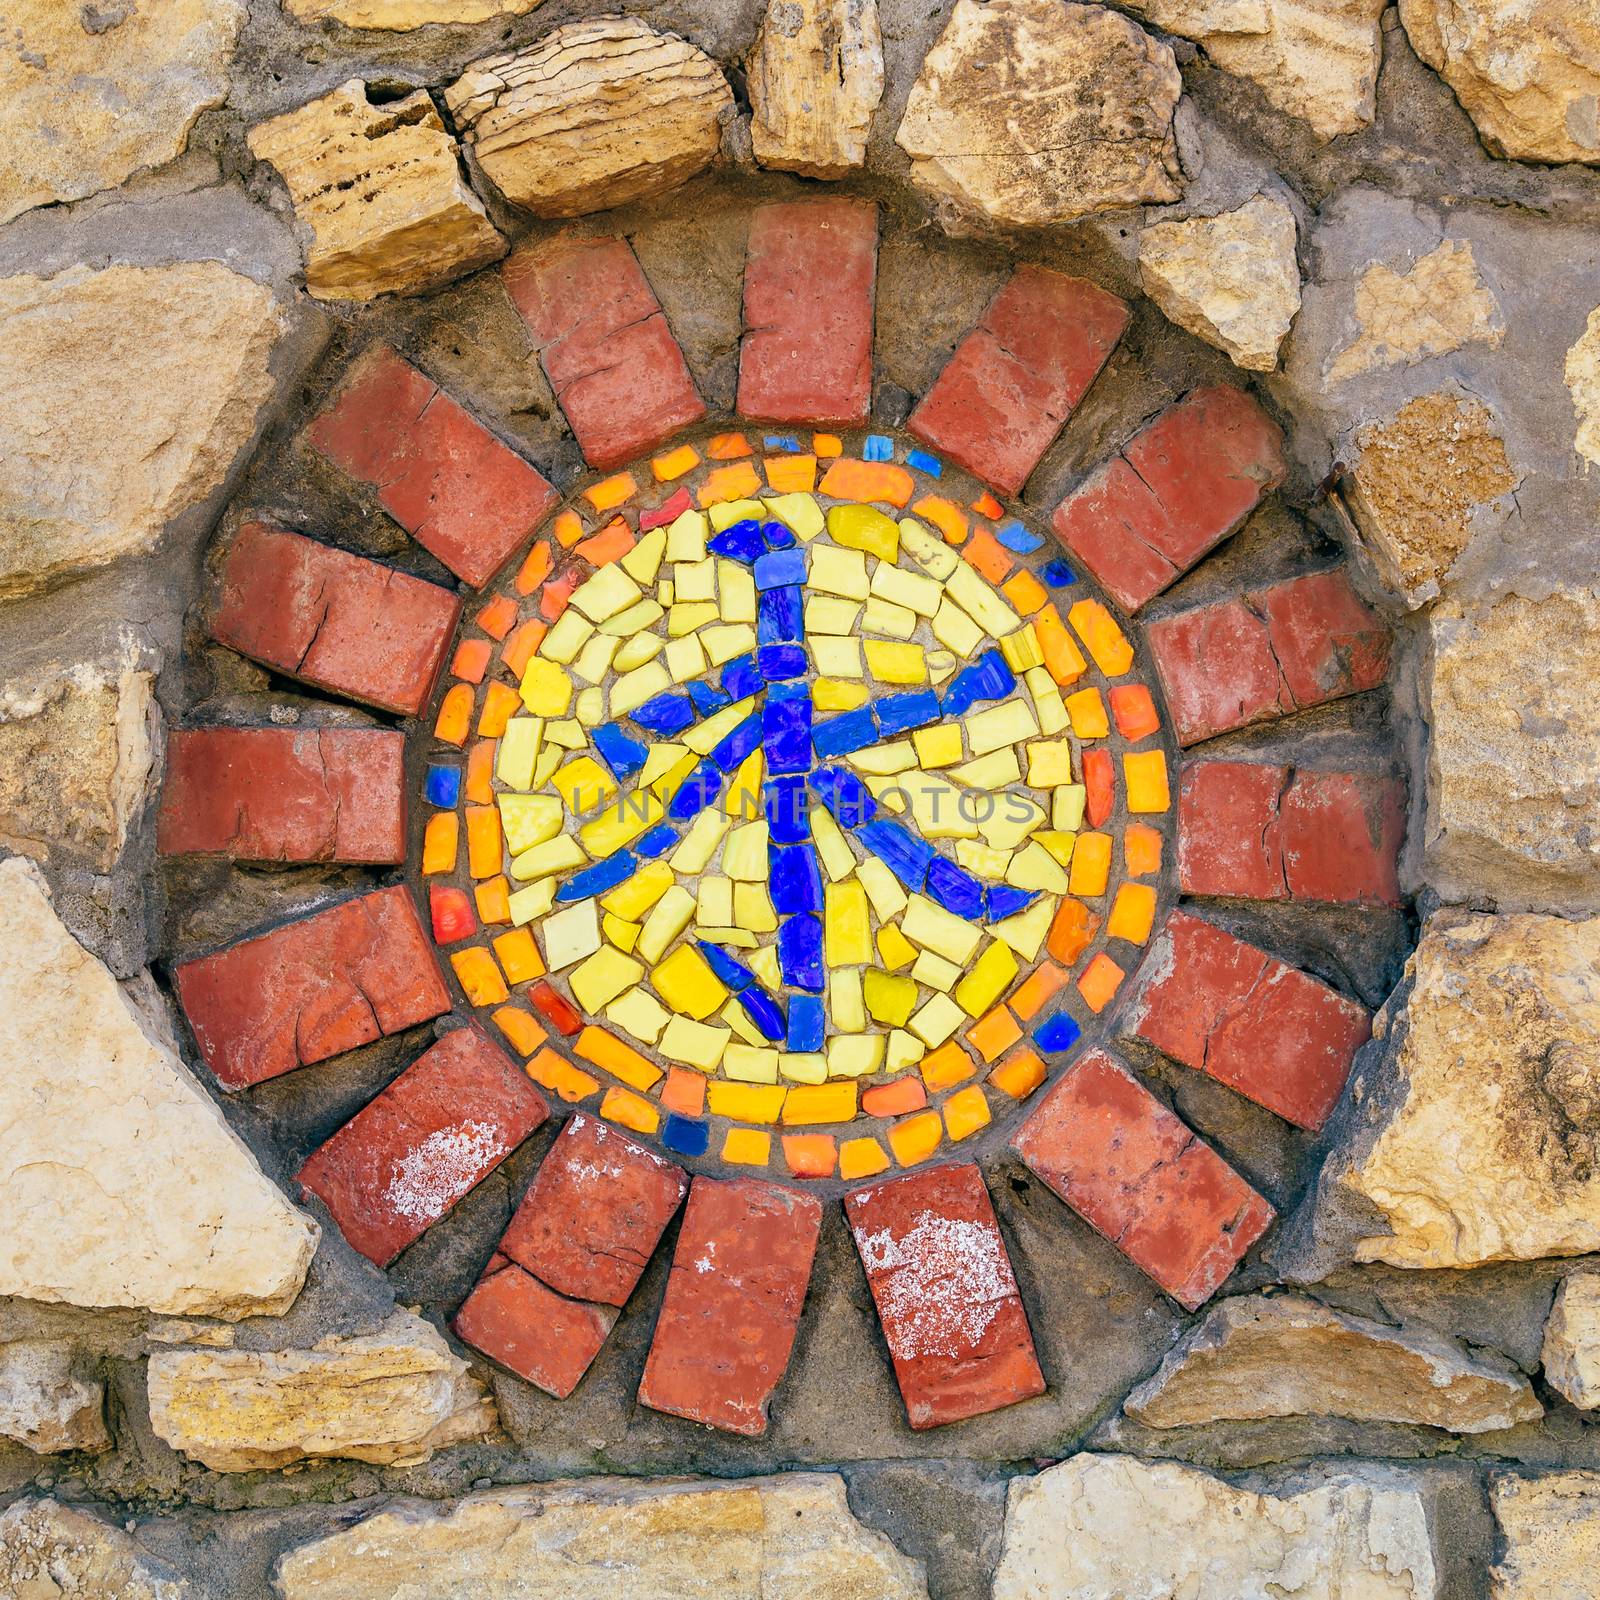 Circular mosaic religious symbol of confucianism on stone wall.